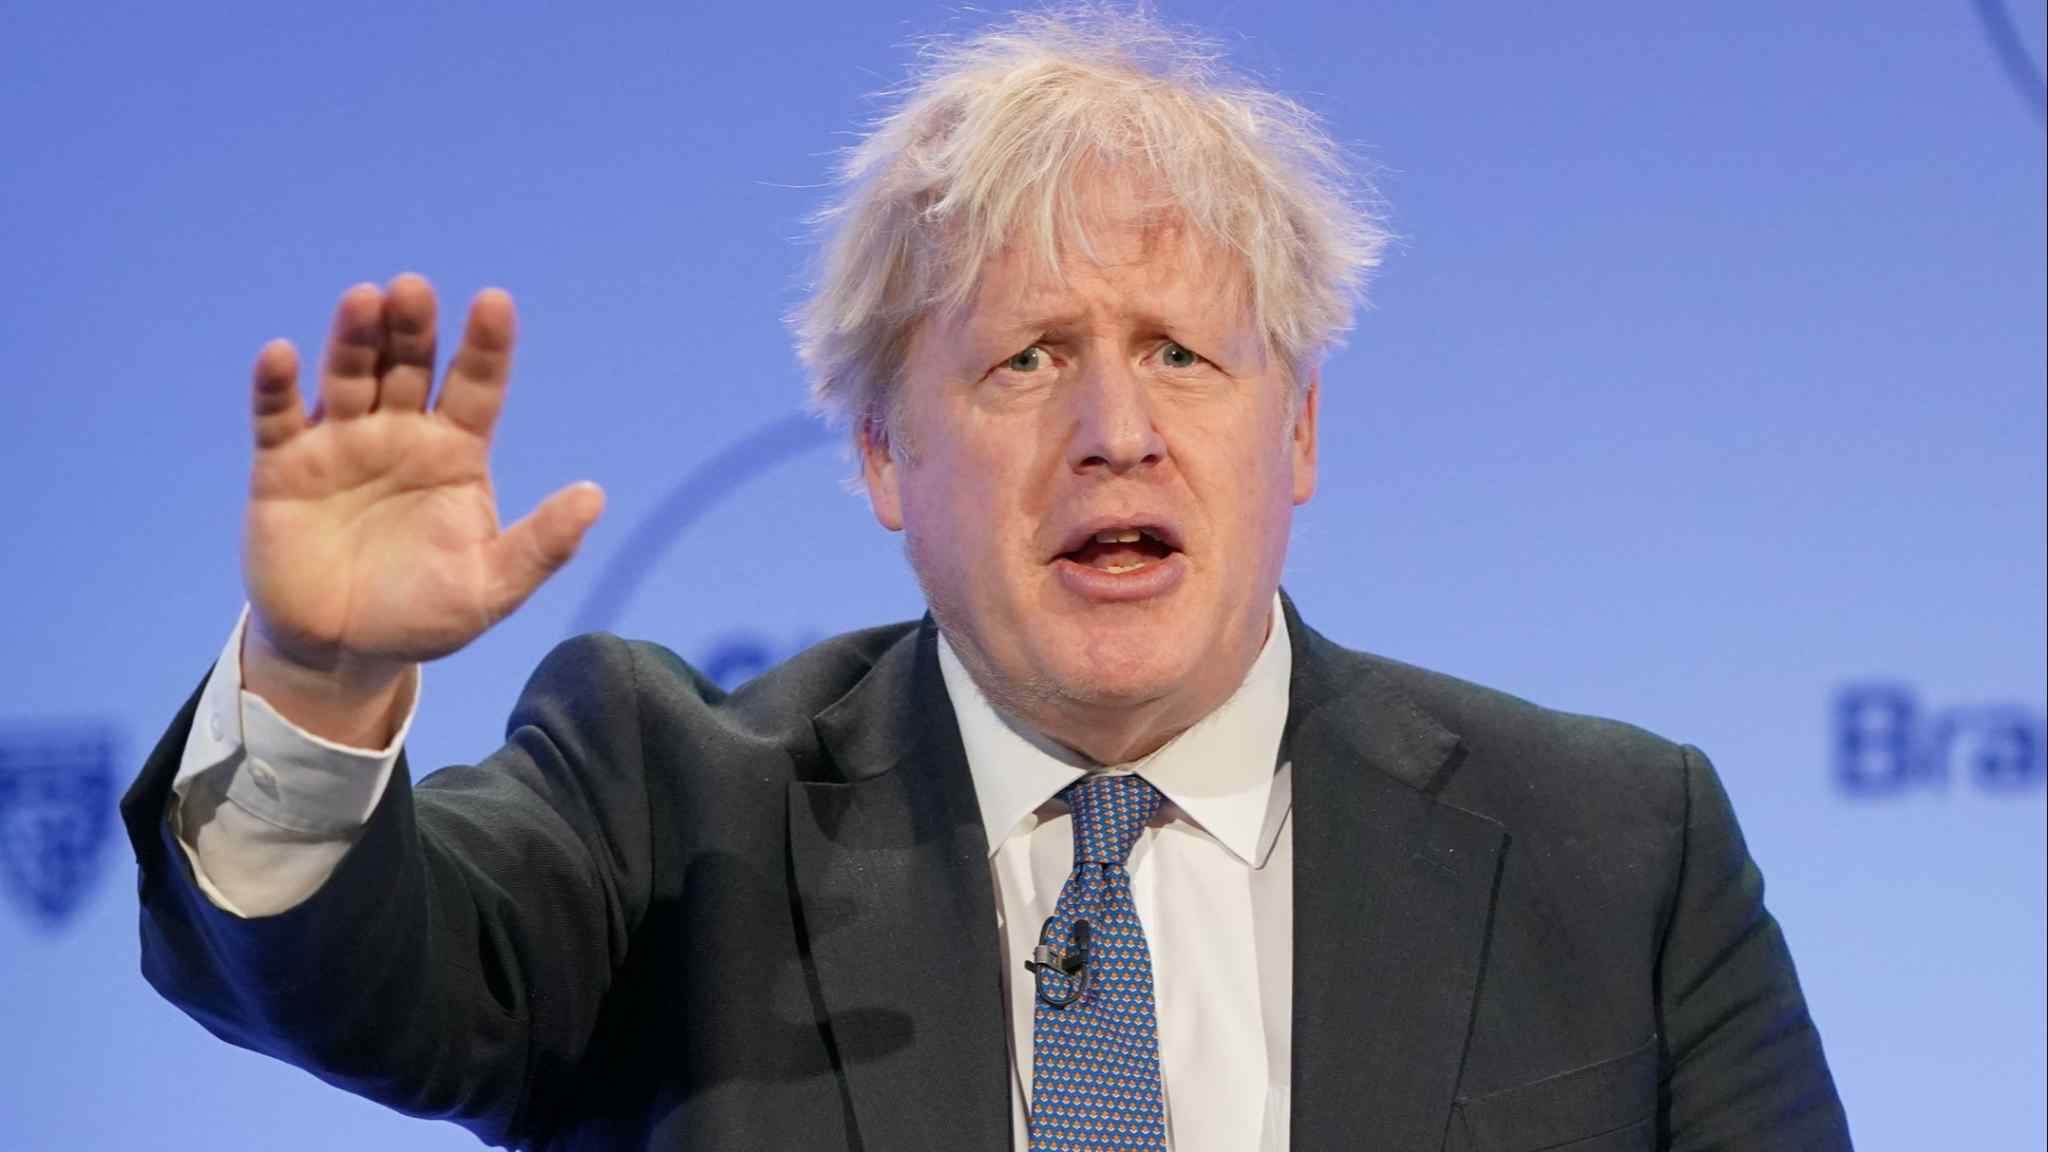 Johnson quits parliament in protest at MPs’ ‘kangaroo court’